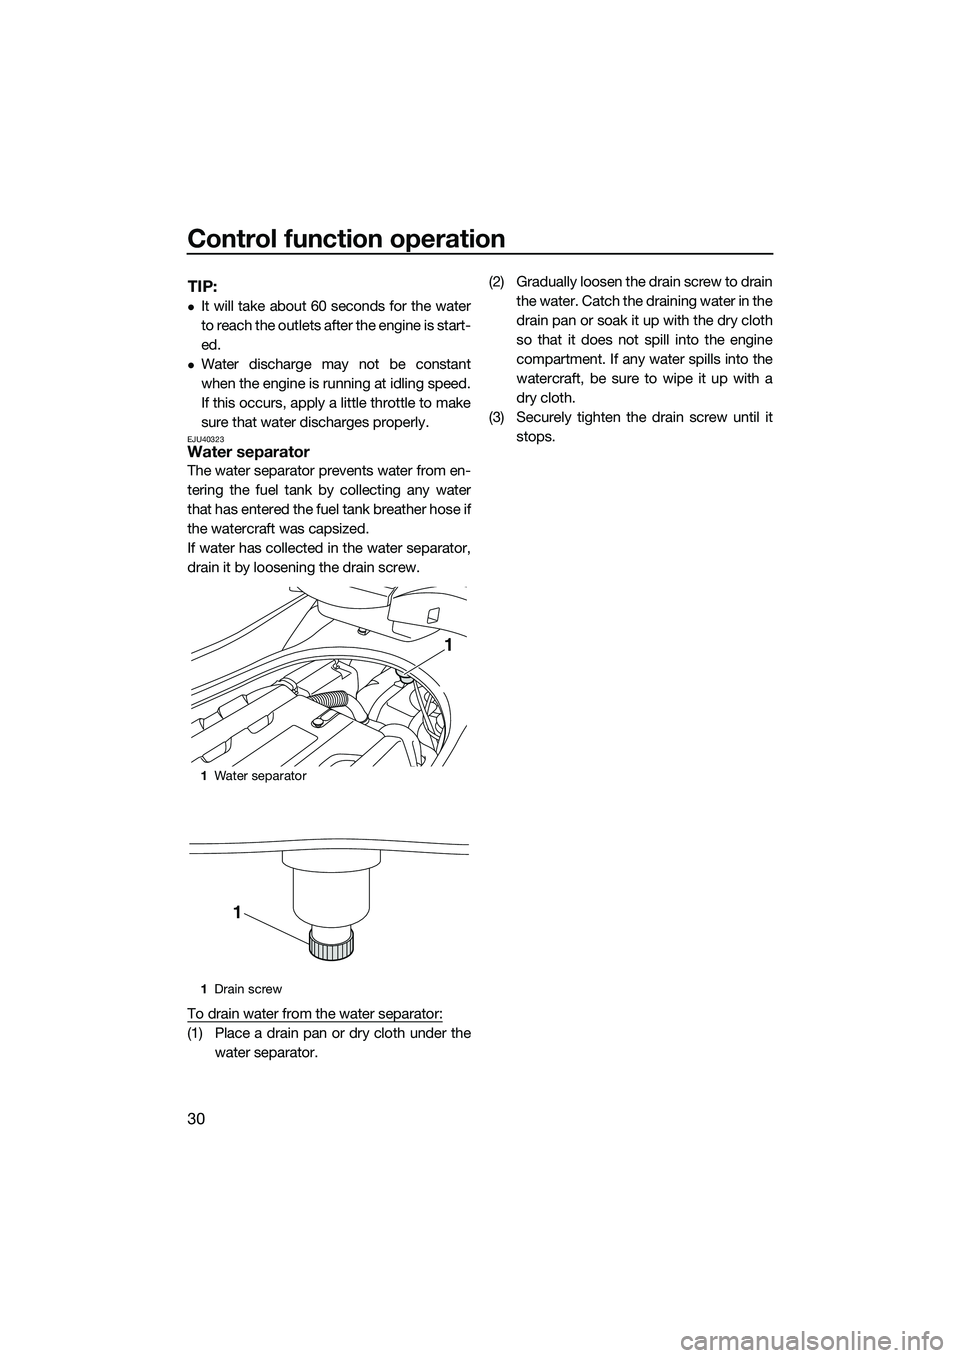 YAMAHA FZR SVHO 2014  Owners Manual Control function operation
30
TIP:
It will take about 60 seconds for the water
to reach the outlets after the engine is start-
ed.
Water discharge may not be constant
when the engine is running 